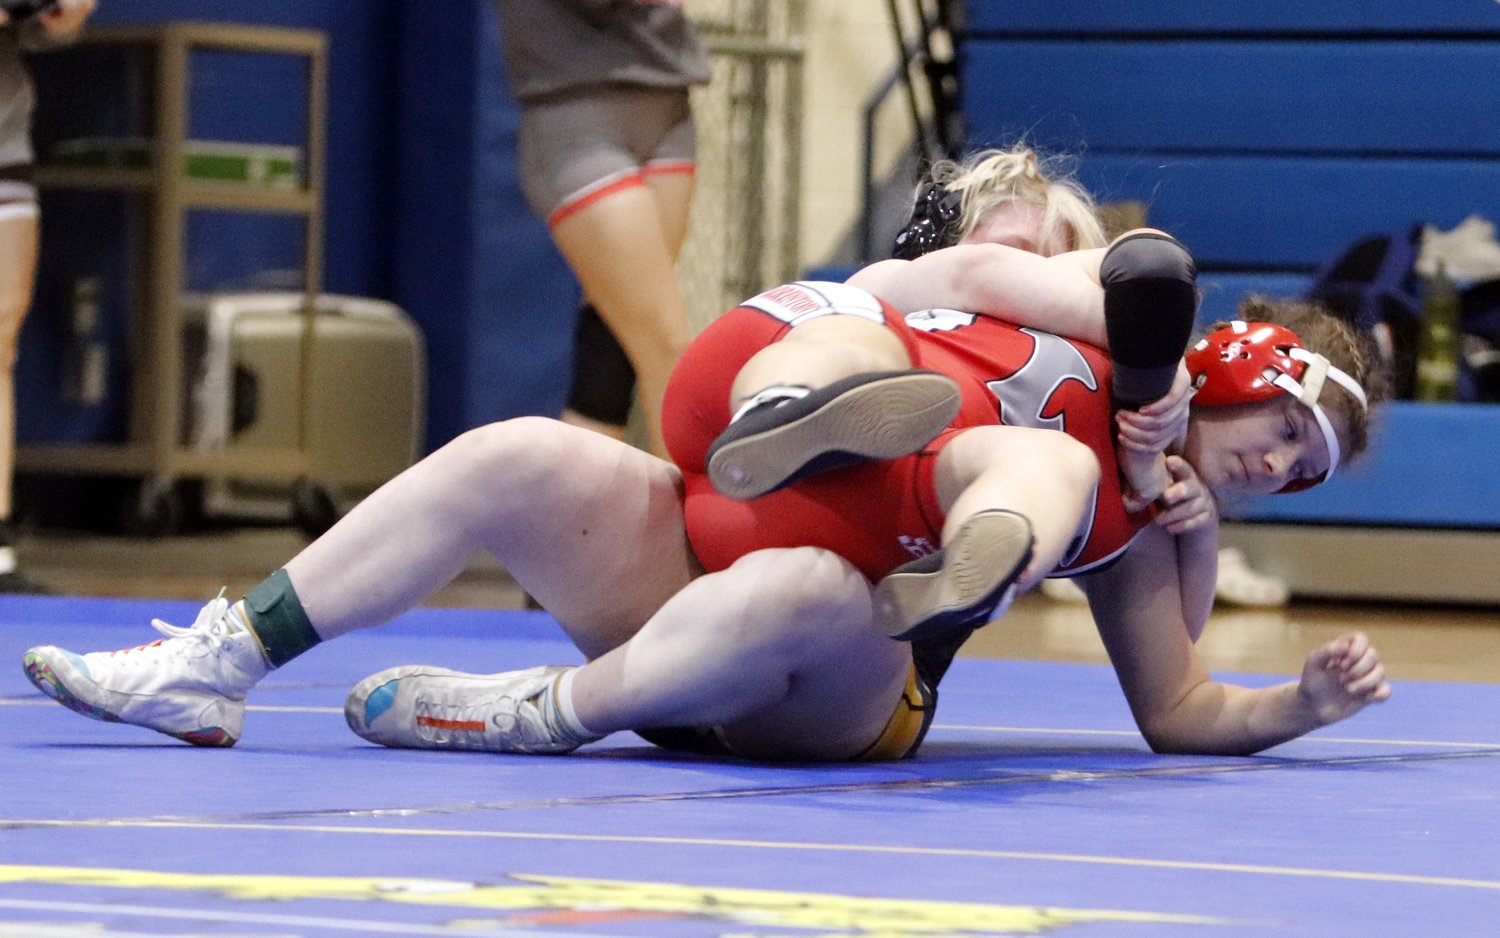 Warrenton freshman Allison Vacek competes against Sullivan wrestler Ruby Daily during the 170-pound fifth place match at Saturday’s Wright City Tournament. Vacek placed sixth in the weight class.